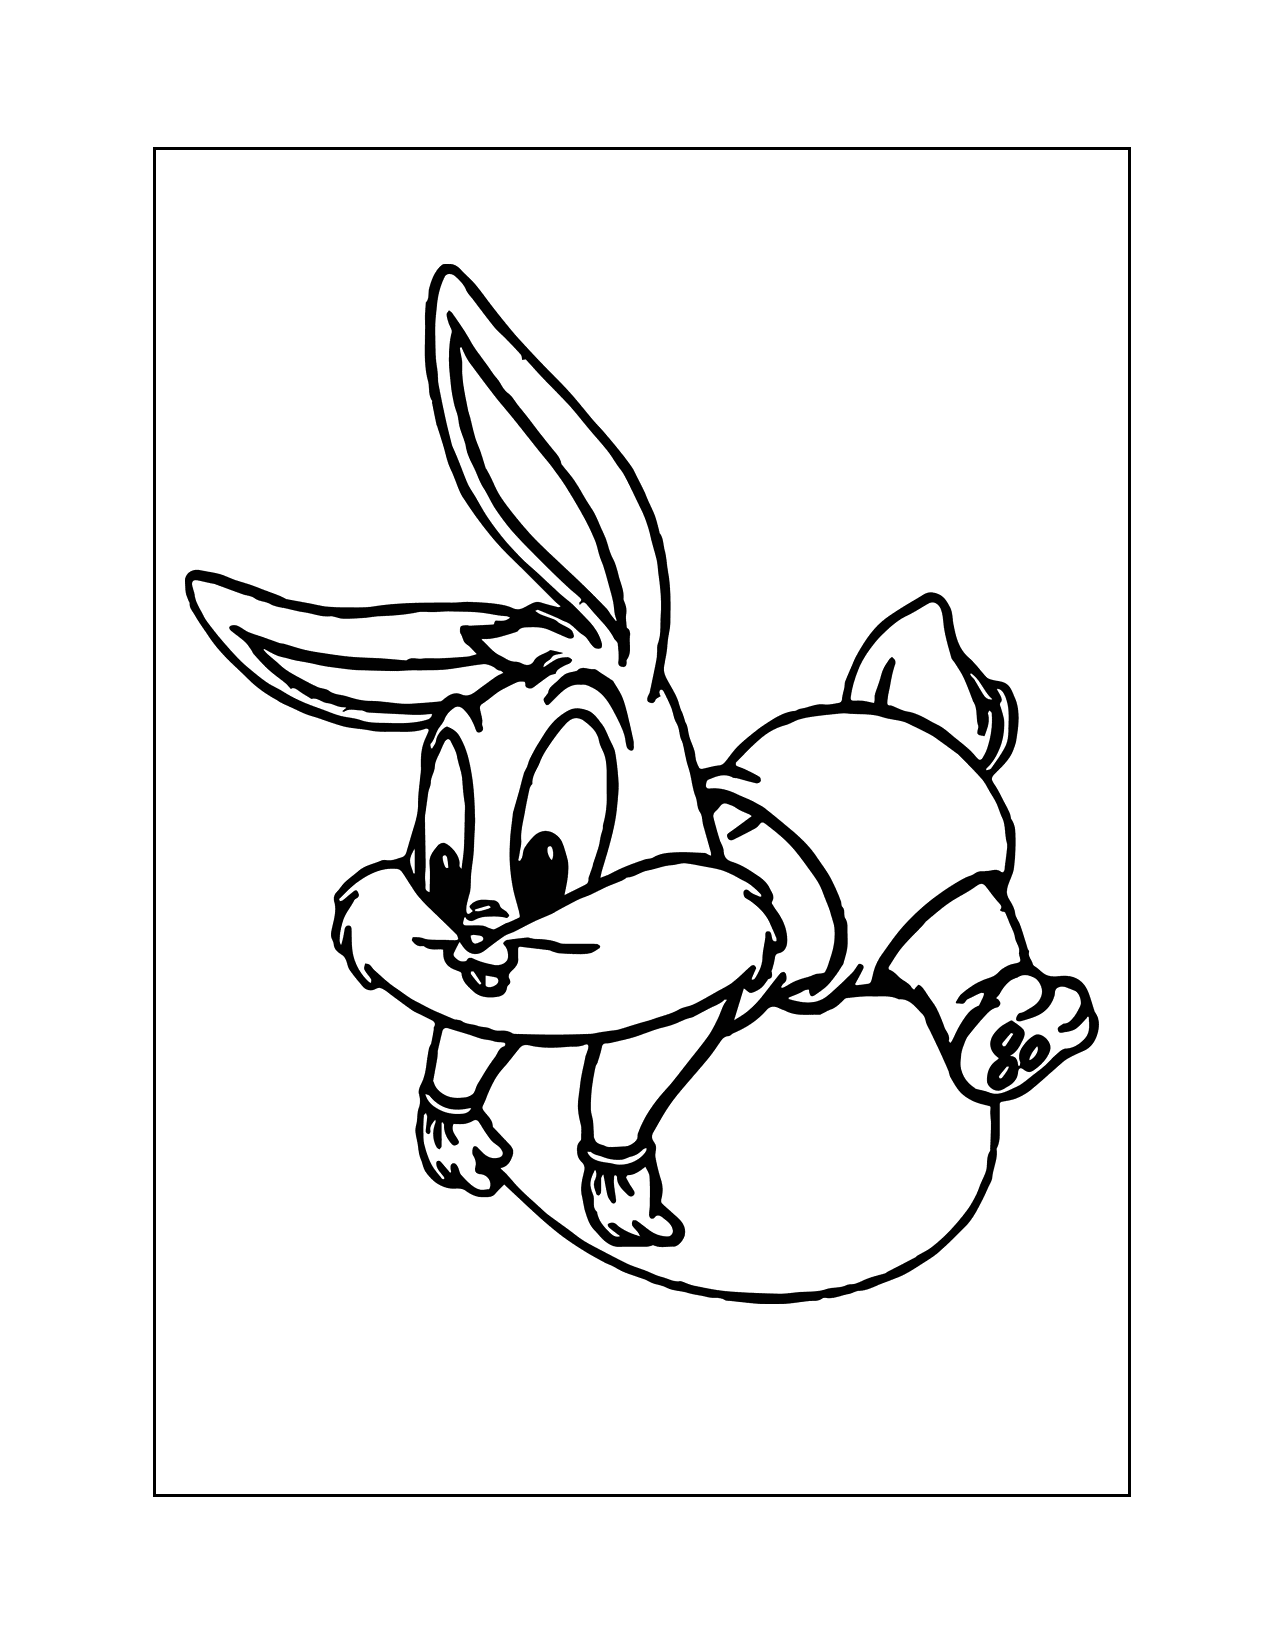 Cute Baby Bugs Bunny Coloring Page